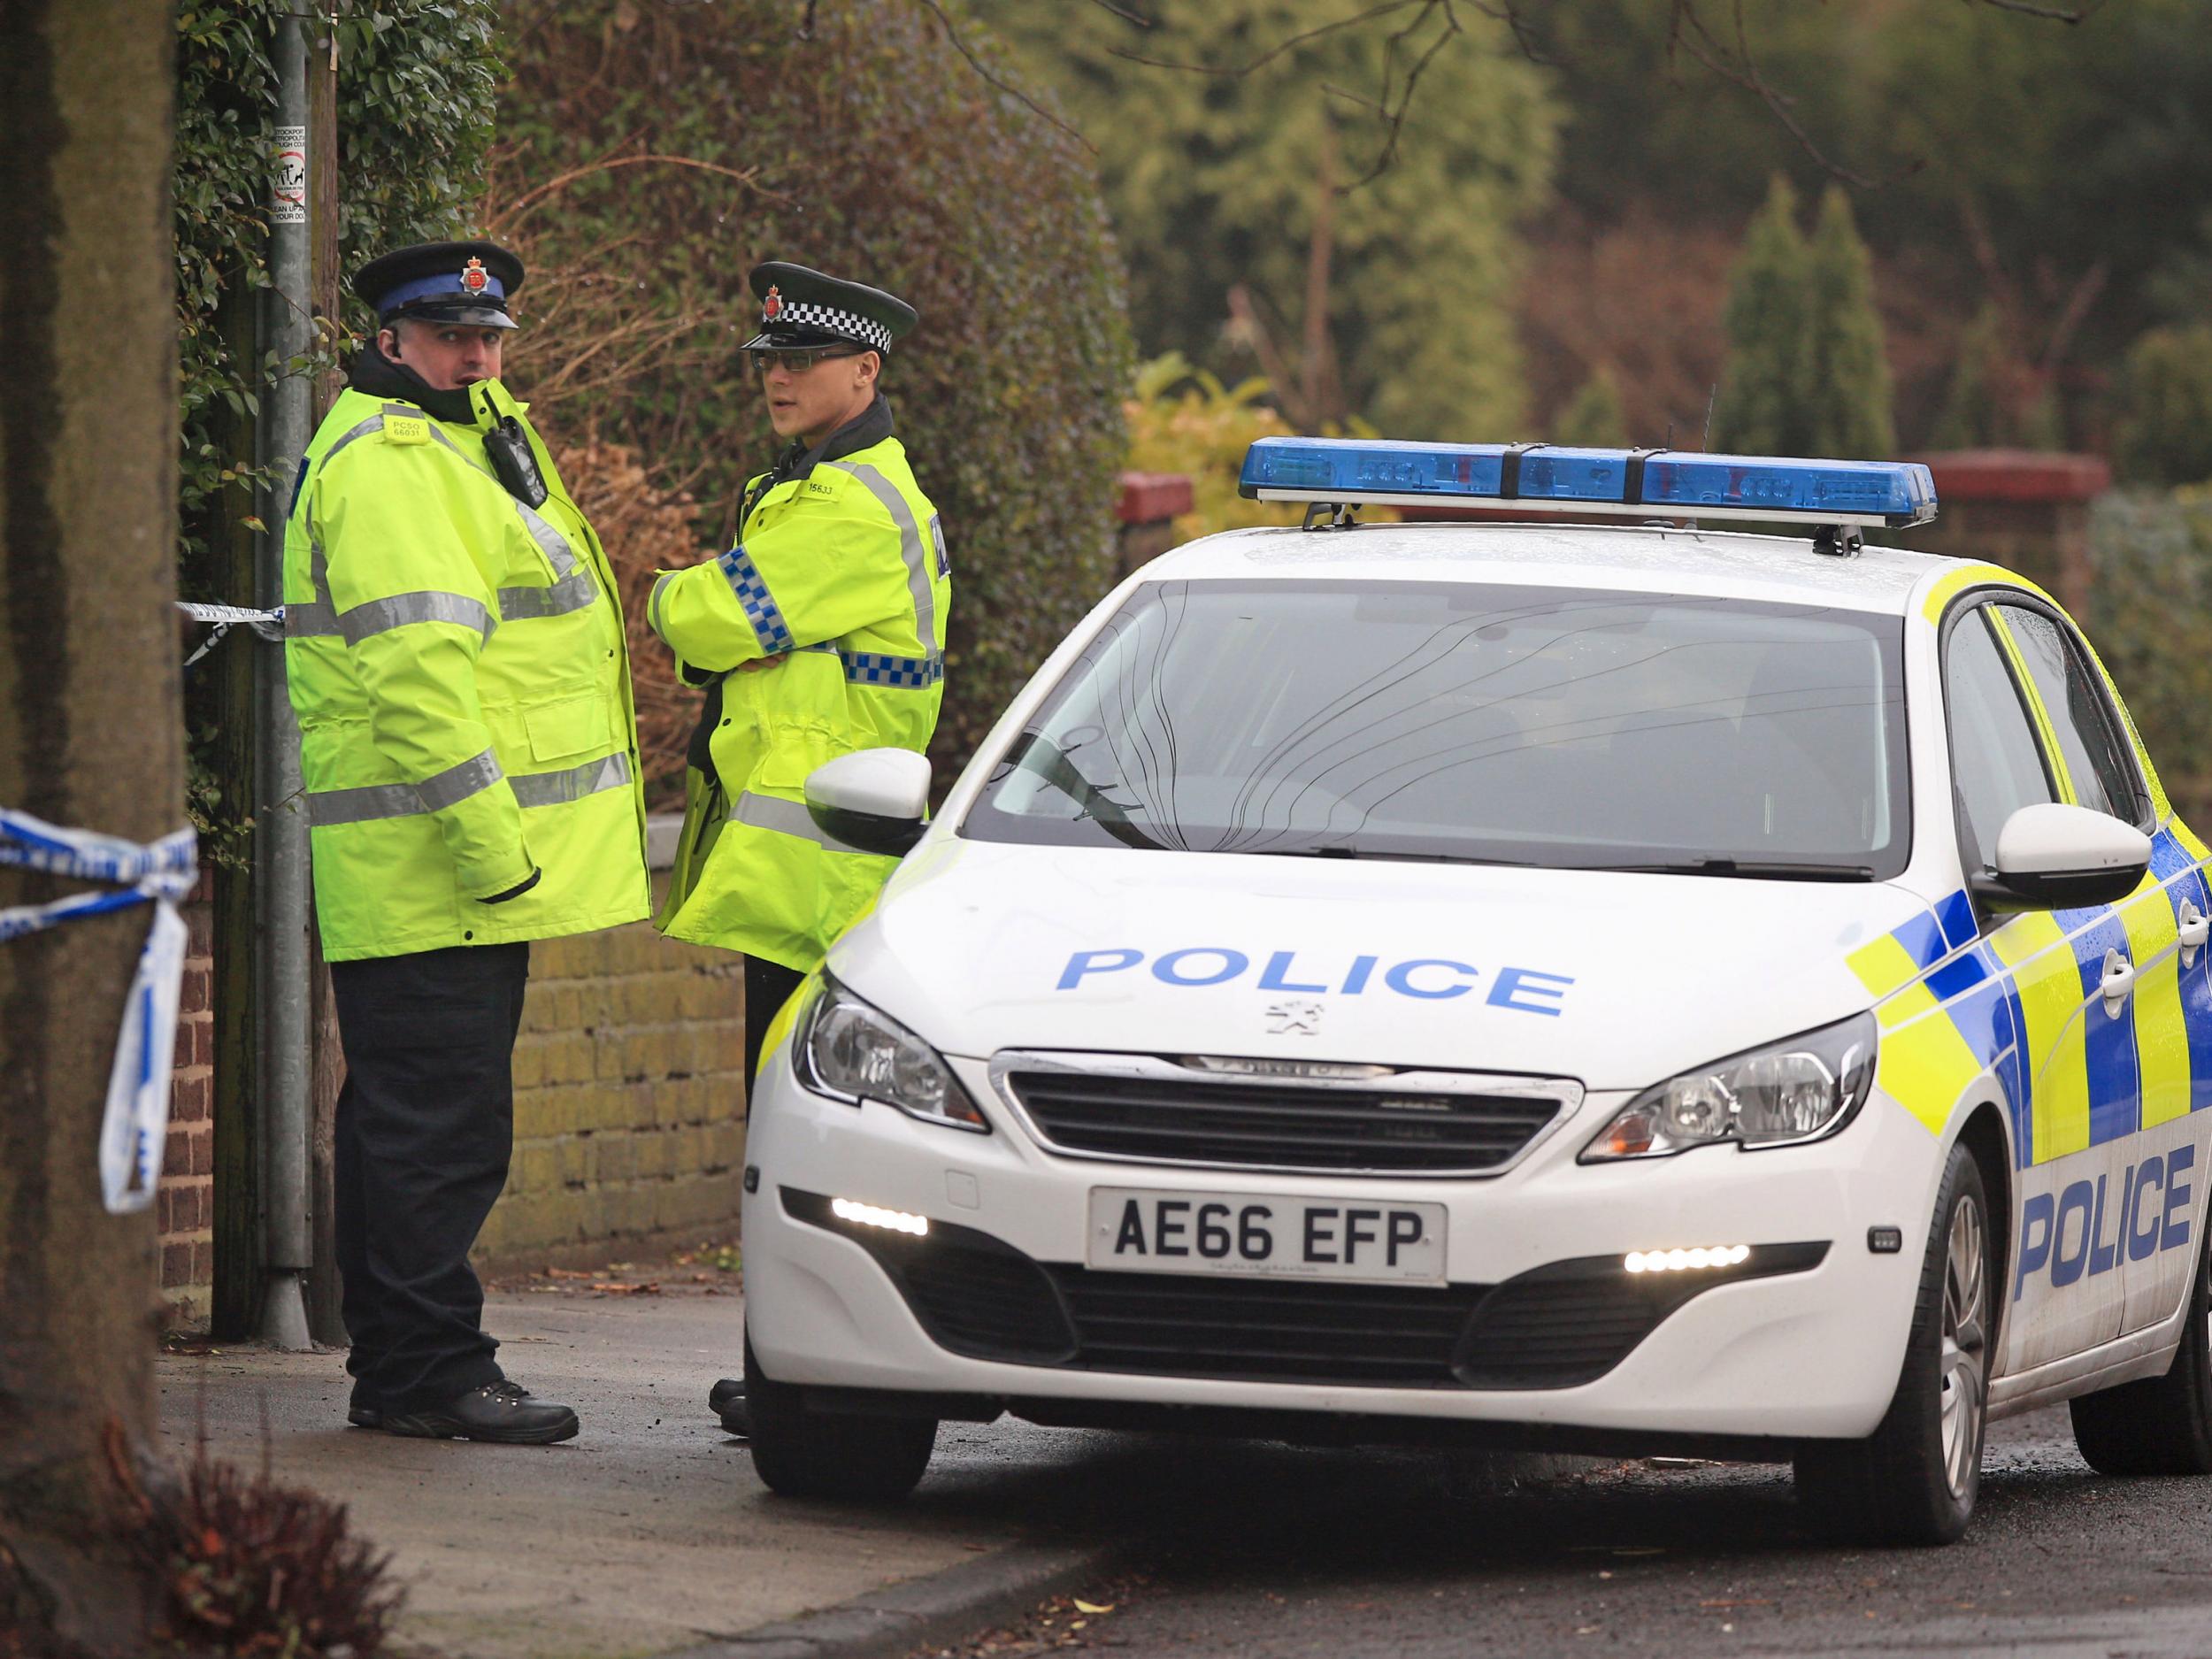 Police at the scene of an investigation at Matlock Road in Reddish on the outskirts of Manchester, as a woman who told police she had killed a man and buried him in a garden is being questioned by murder detectives following the discovery of human remains